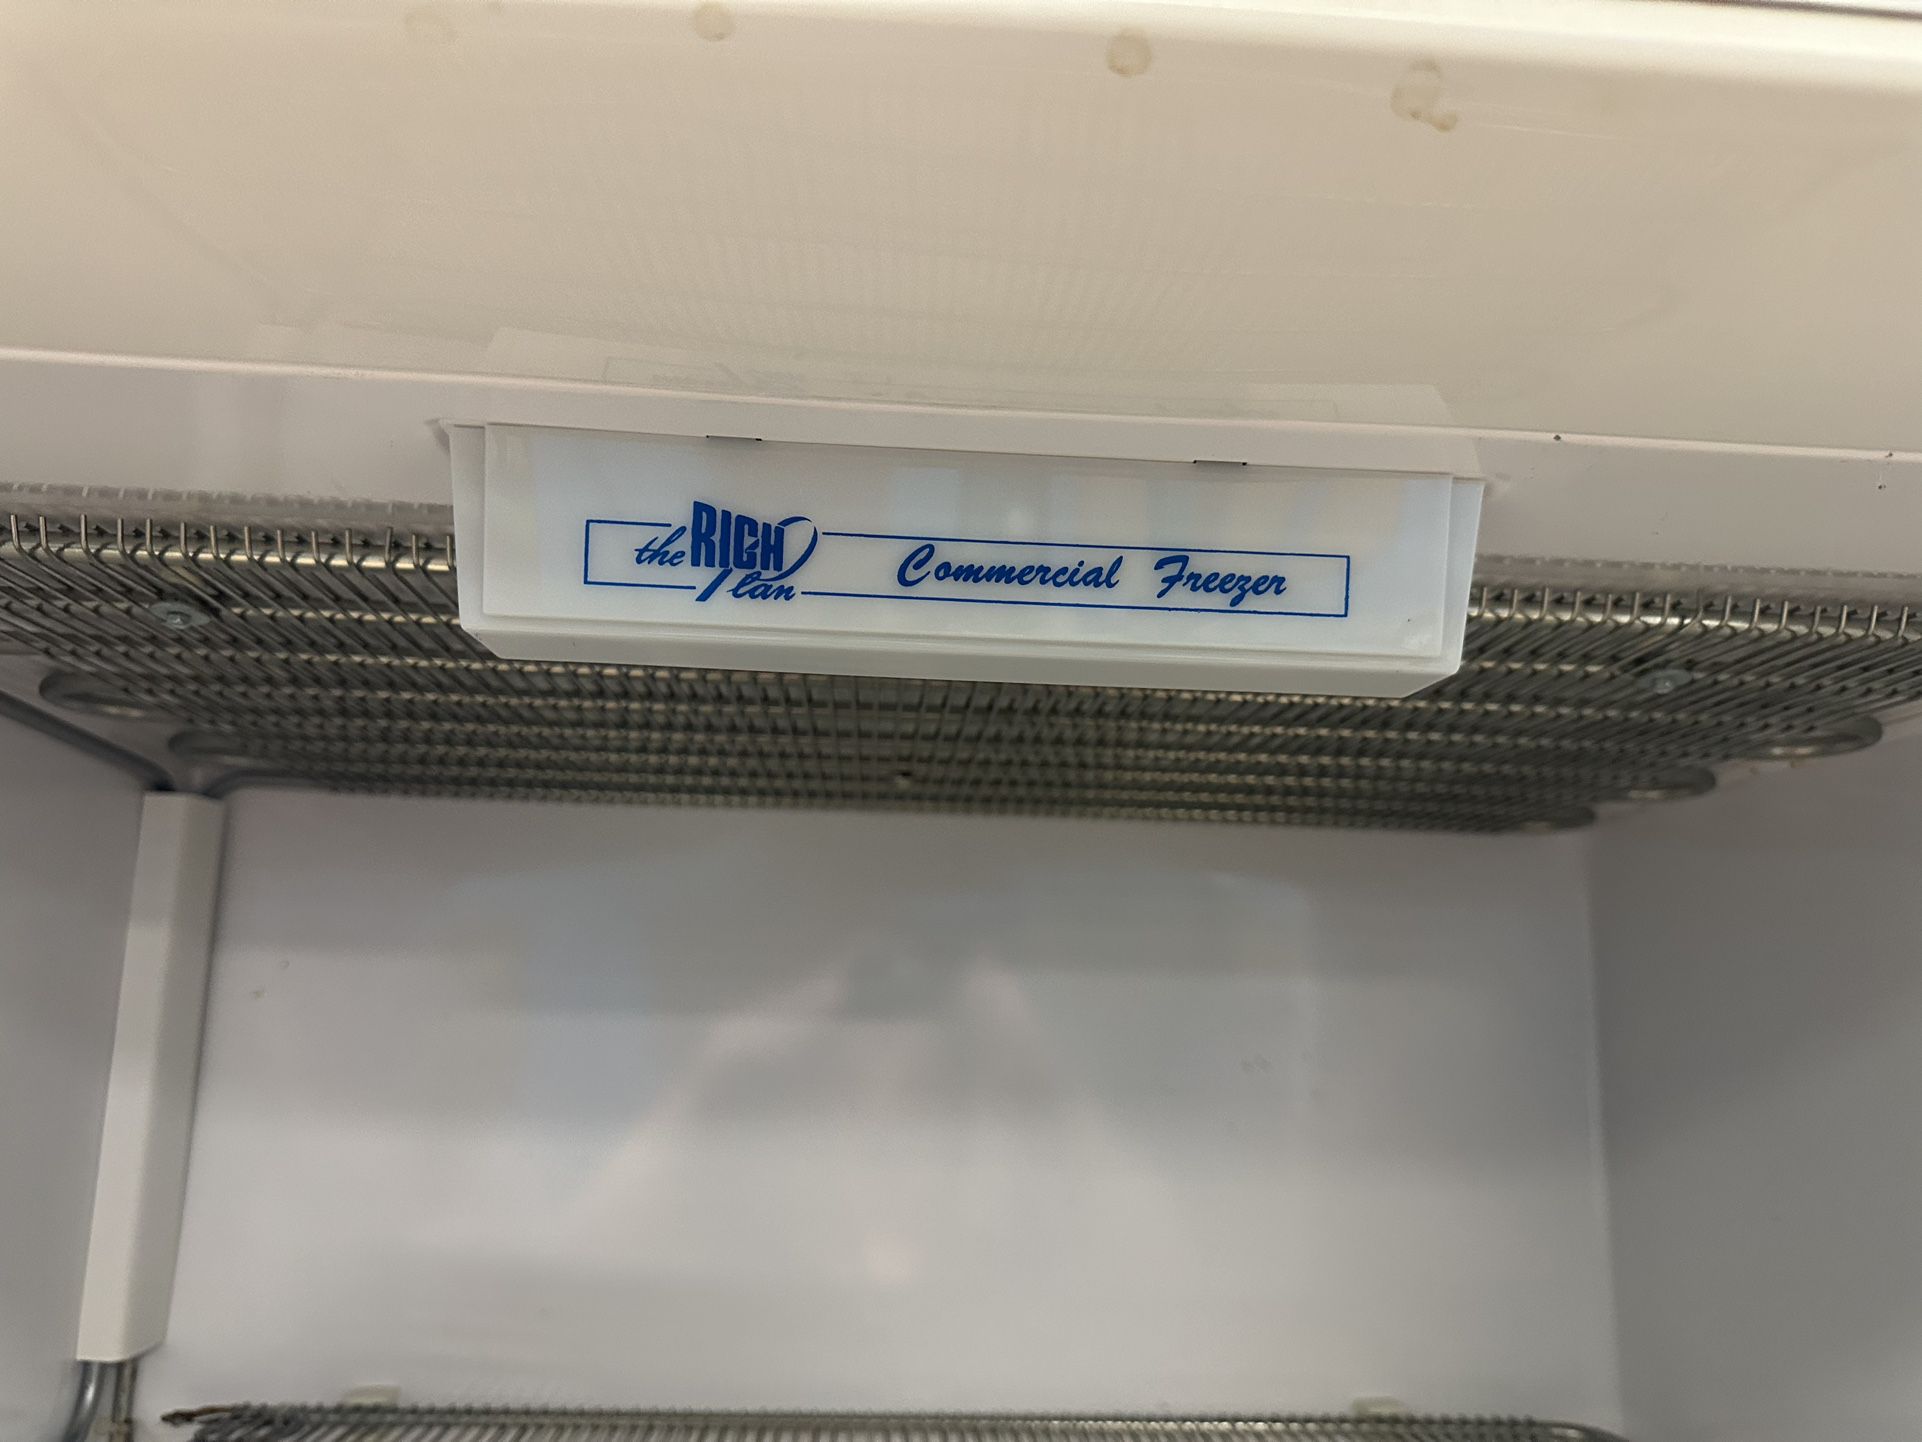 Upright Commercial Freezer